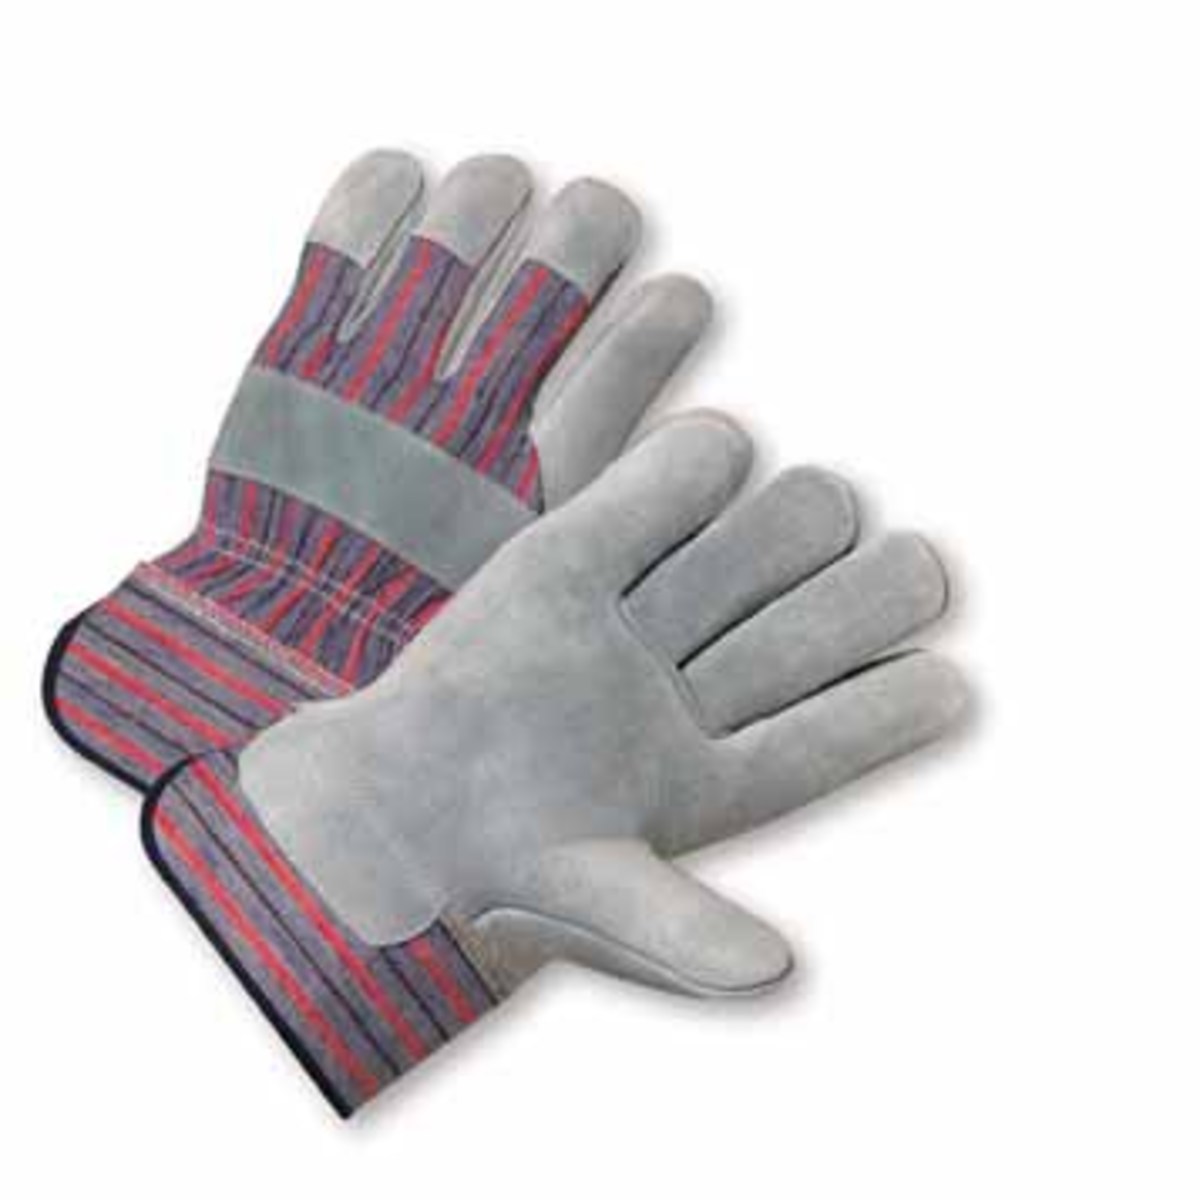 PIP® Large Standard Split Leather Palm Gloves With Canvas Back And Rubberized Safety Cuff